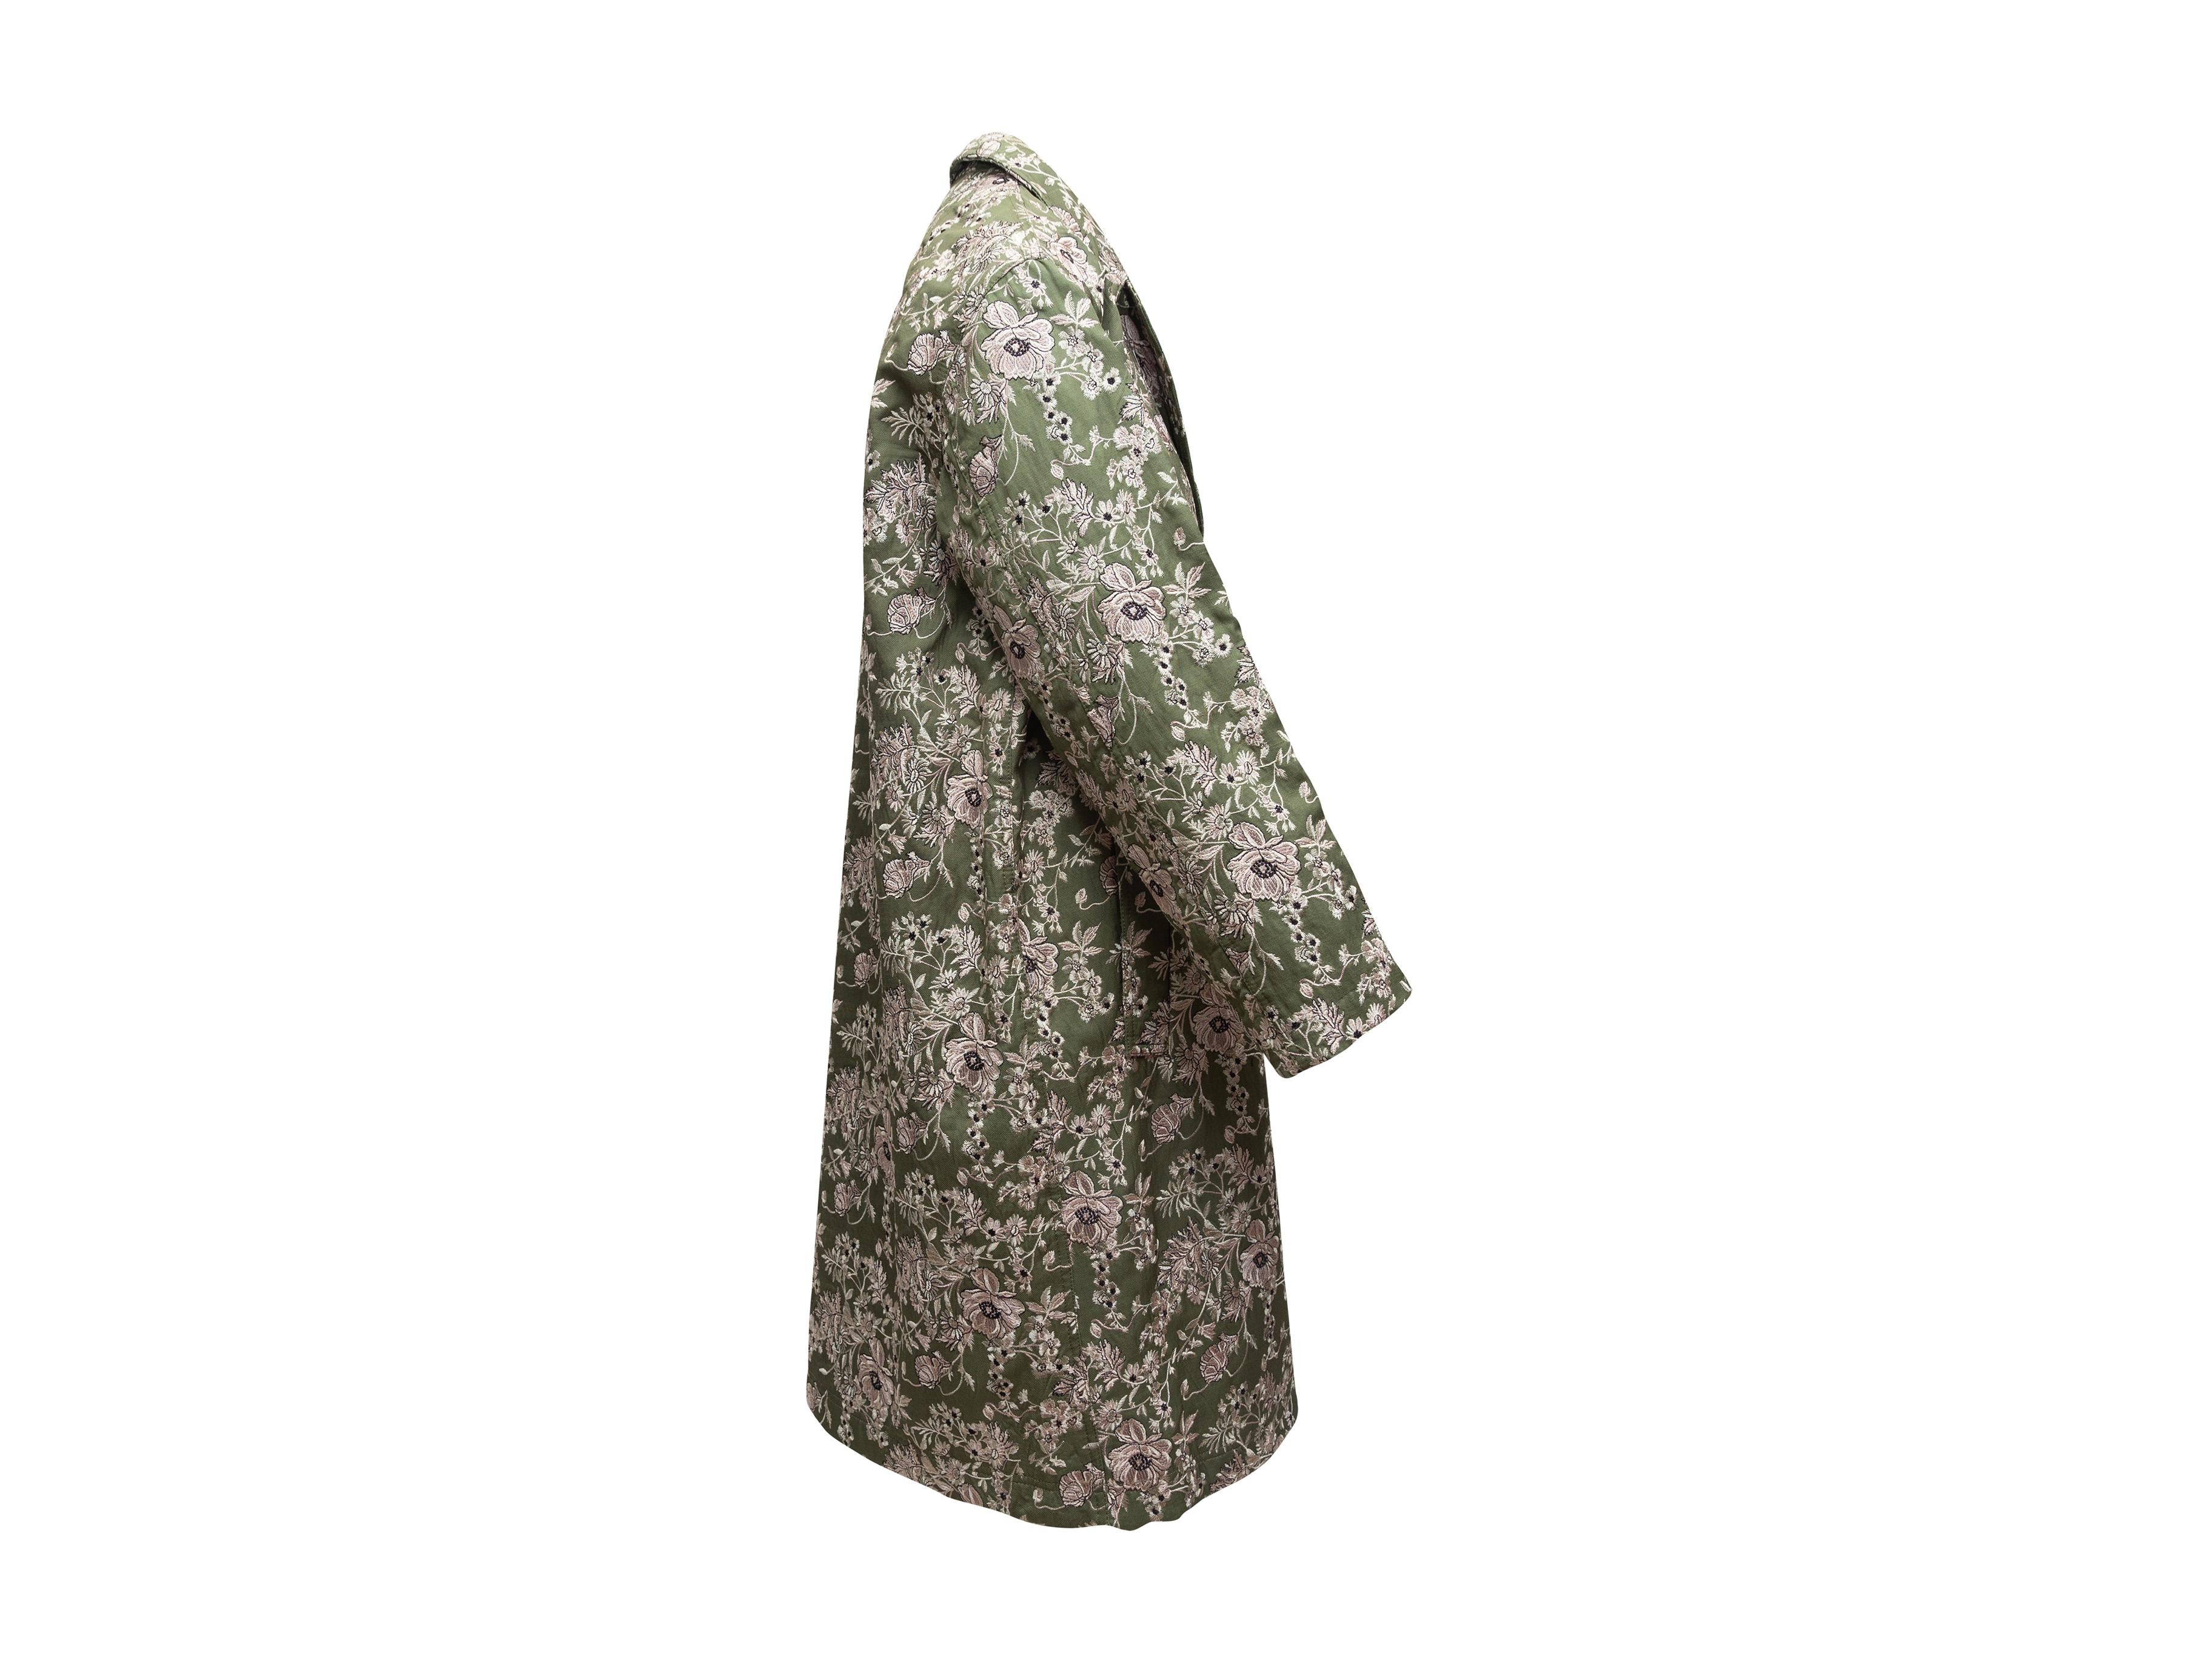 Product details: Olive green, cream and black long jacquard coat by Robert Rodriguez. Floral pattern throughout. Peaked lapel. Dual hip pockets. Button closures at front. 46